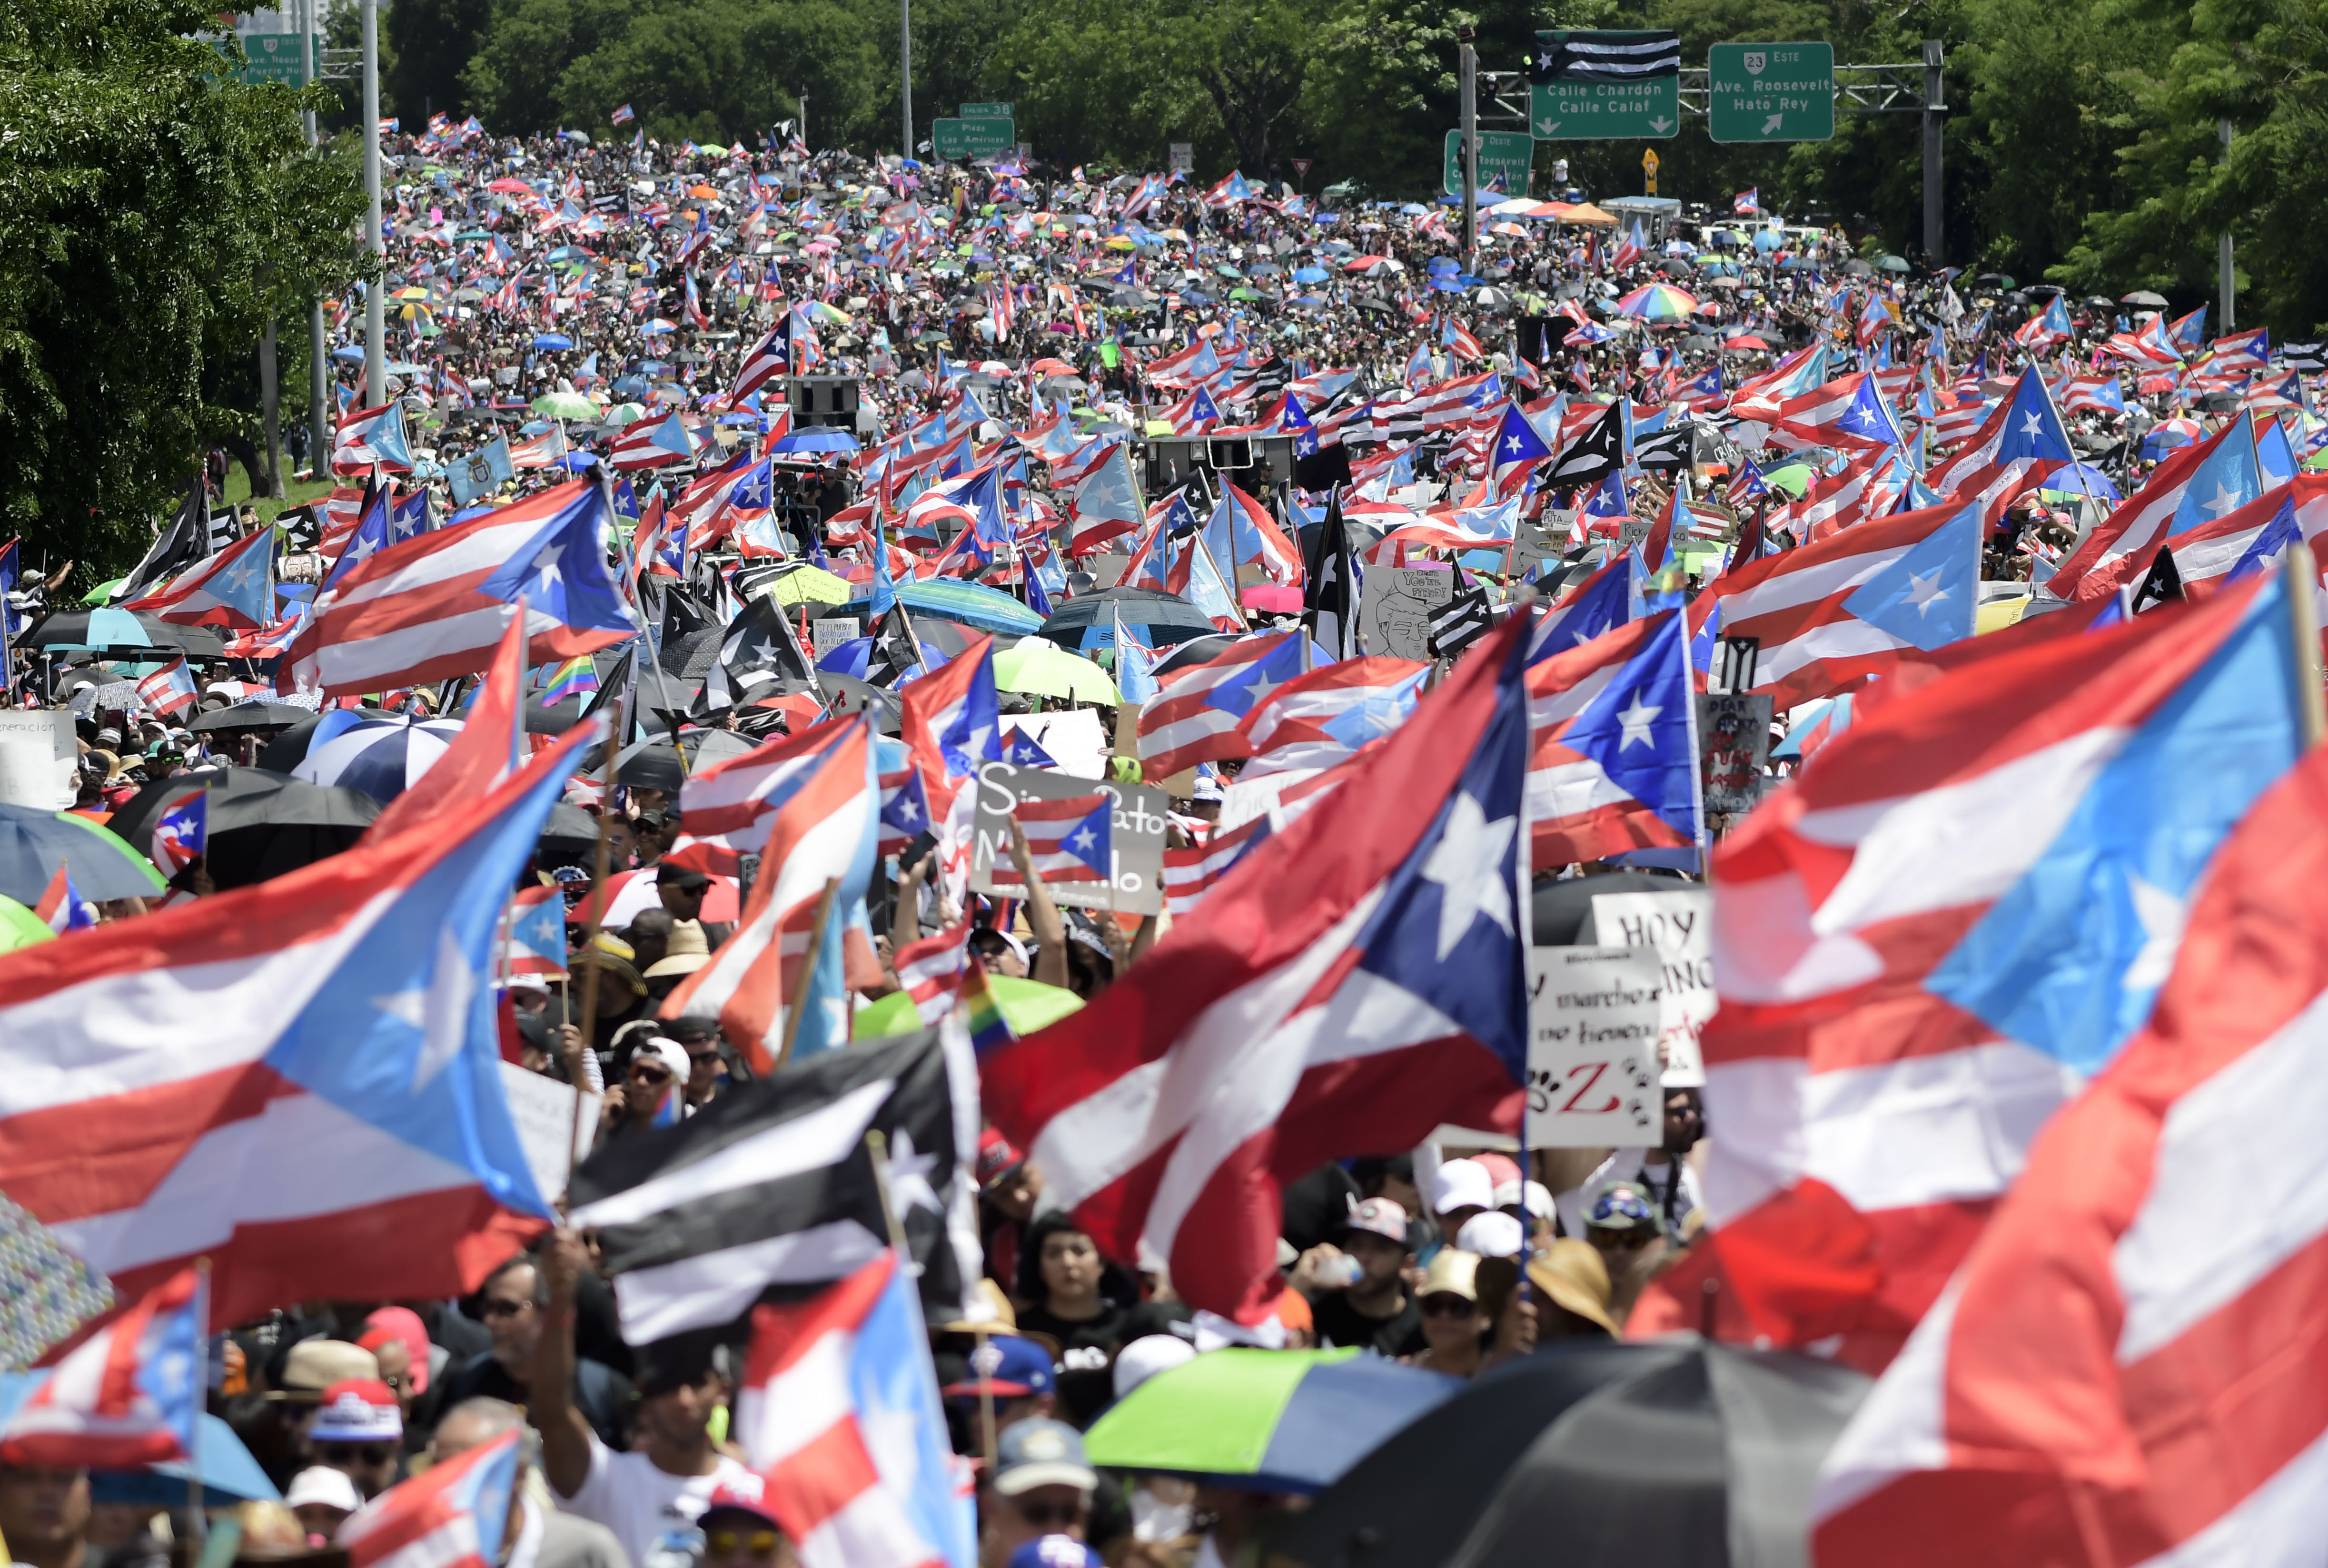 Demonstrators march on Las Americas highway demanding the resignation of governor Ricardo Rossello, in San Juan, Puerto Rico, Monday, July 22, 2019. Protesters are demanding Rossello step down for his involvement in a private chat in which he used profanities to describe an ex-New York City councilwoman and a federal control board overseeing the island's finance. (AP Photo/Carlos Giusti)